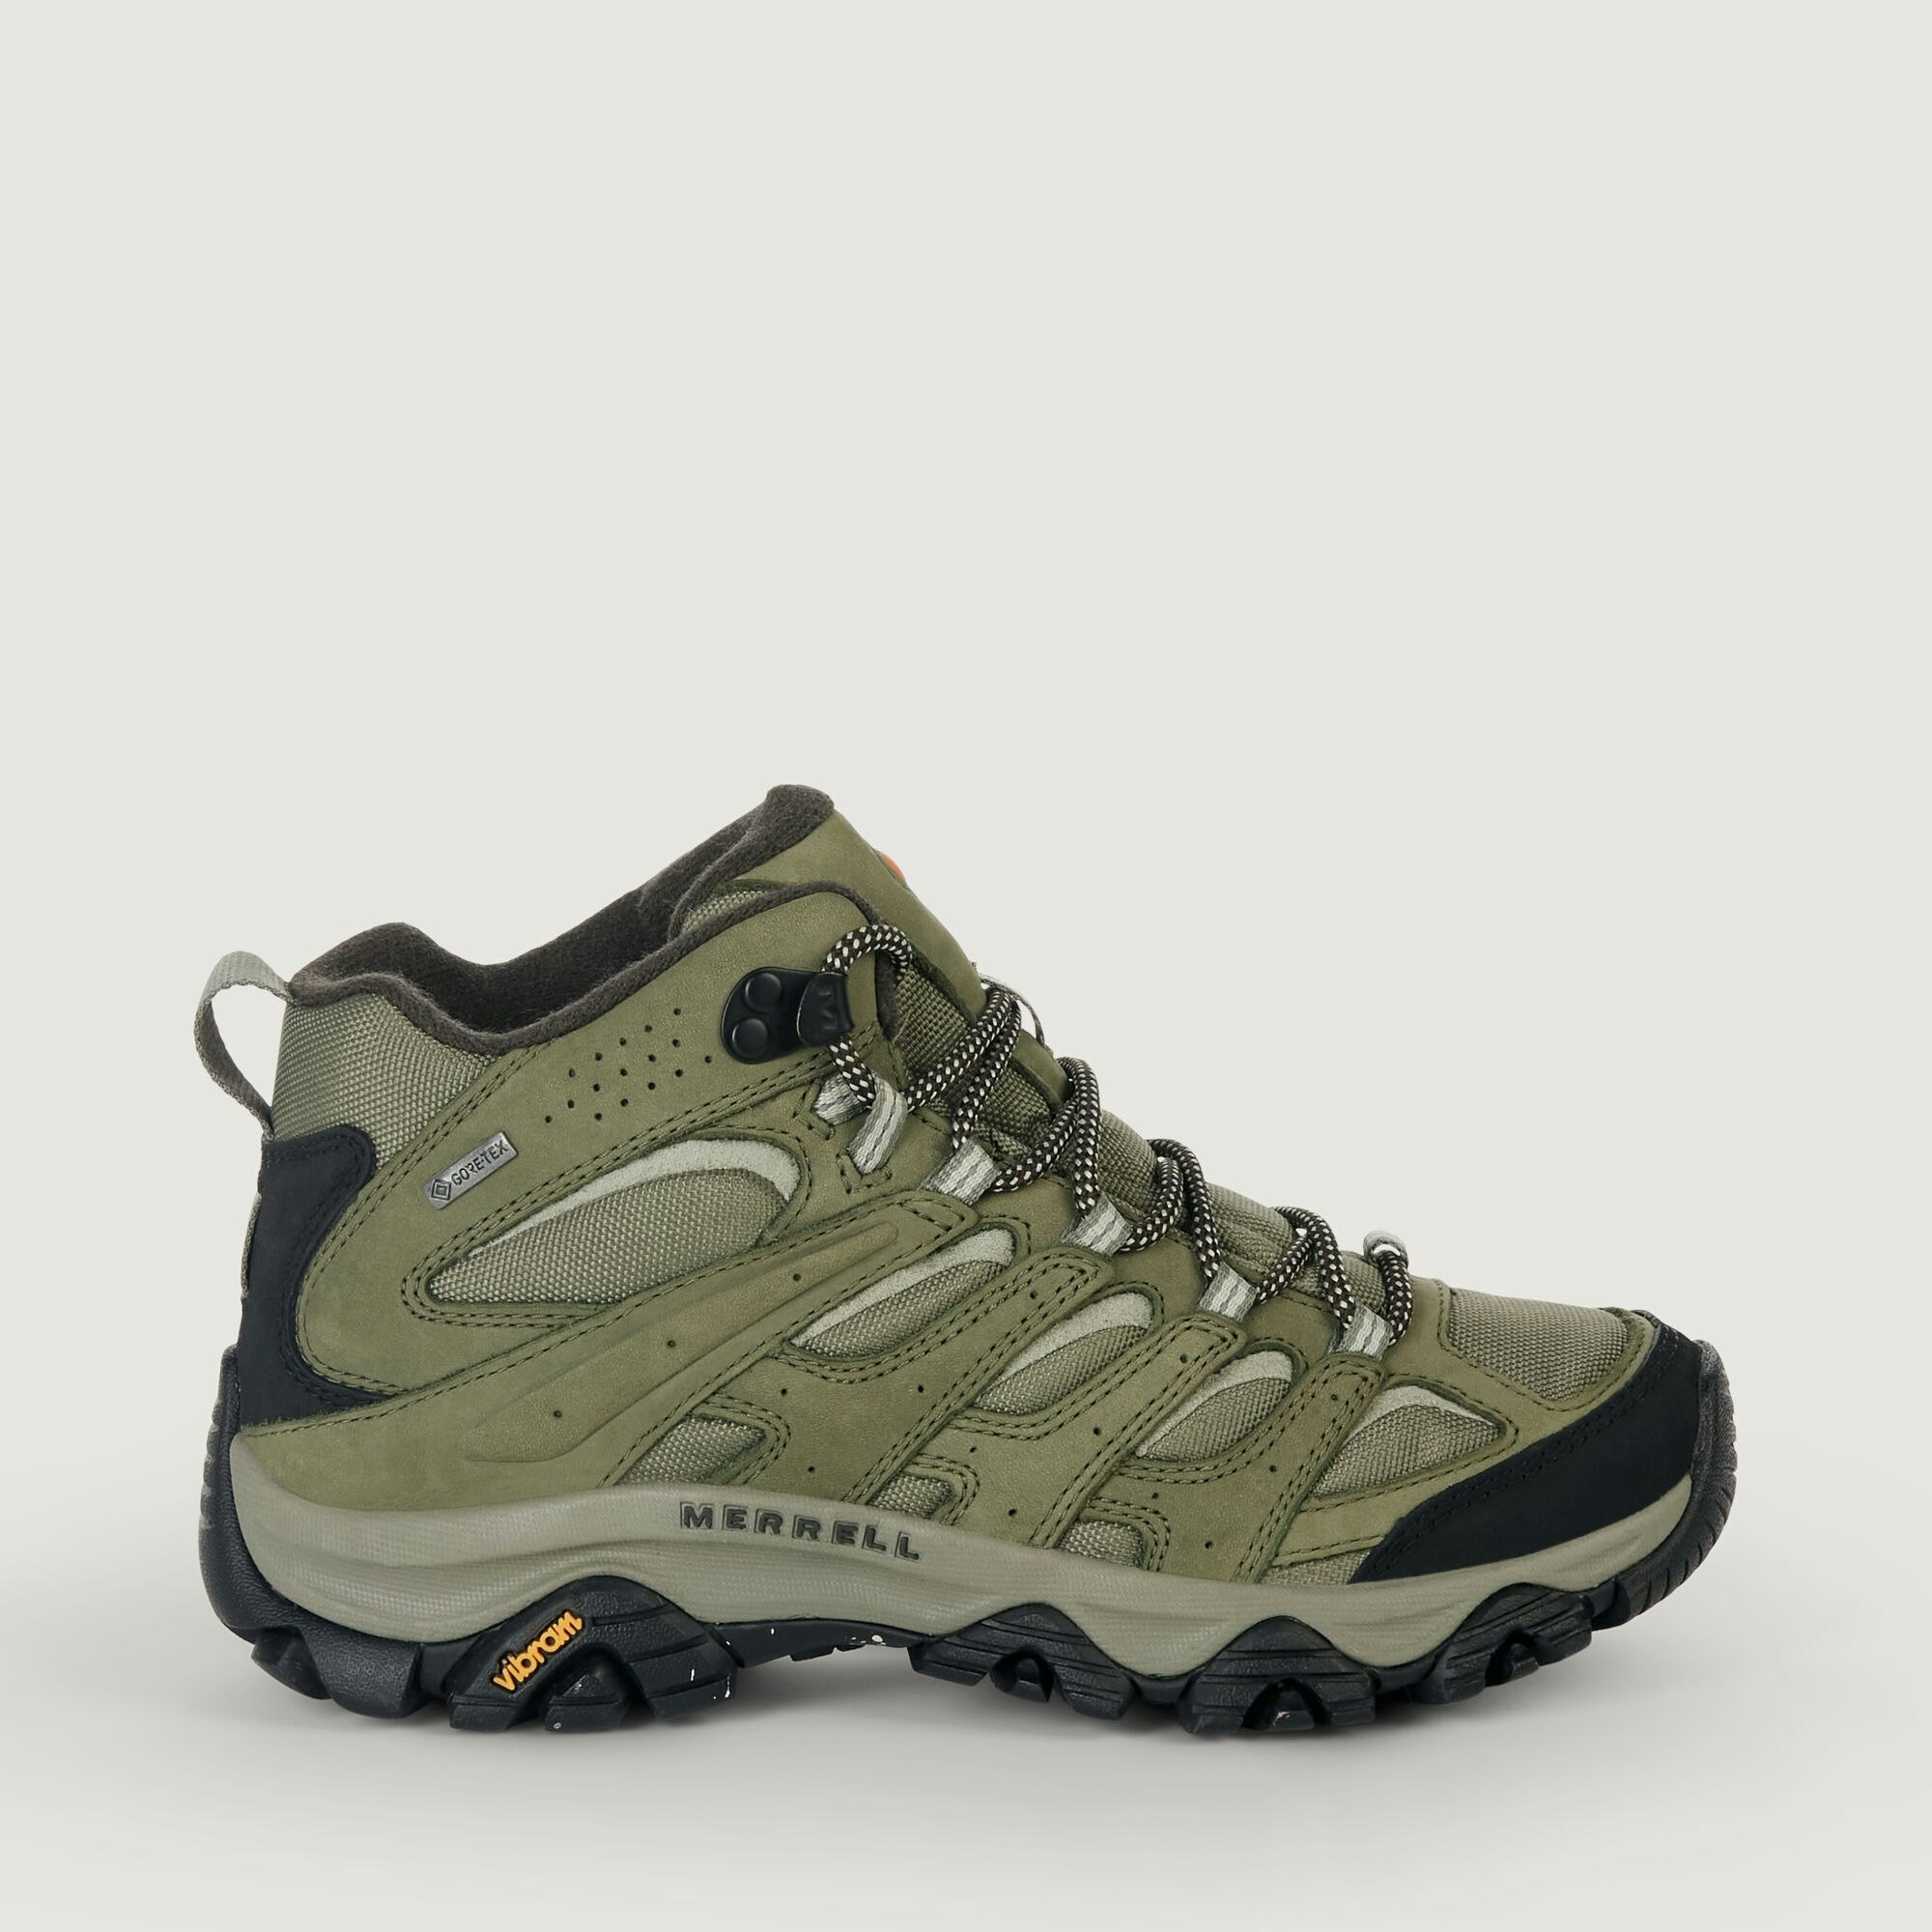 Merrell Moab 3 Gore-Tex (olive) women's shoes